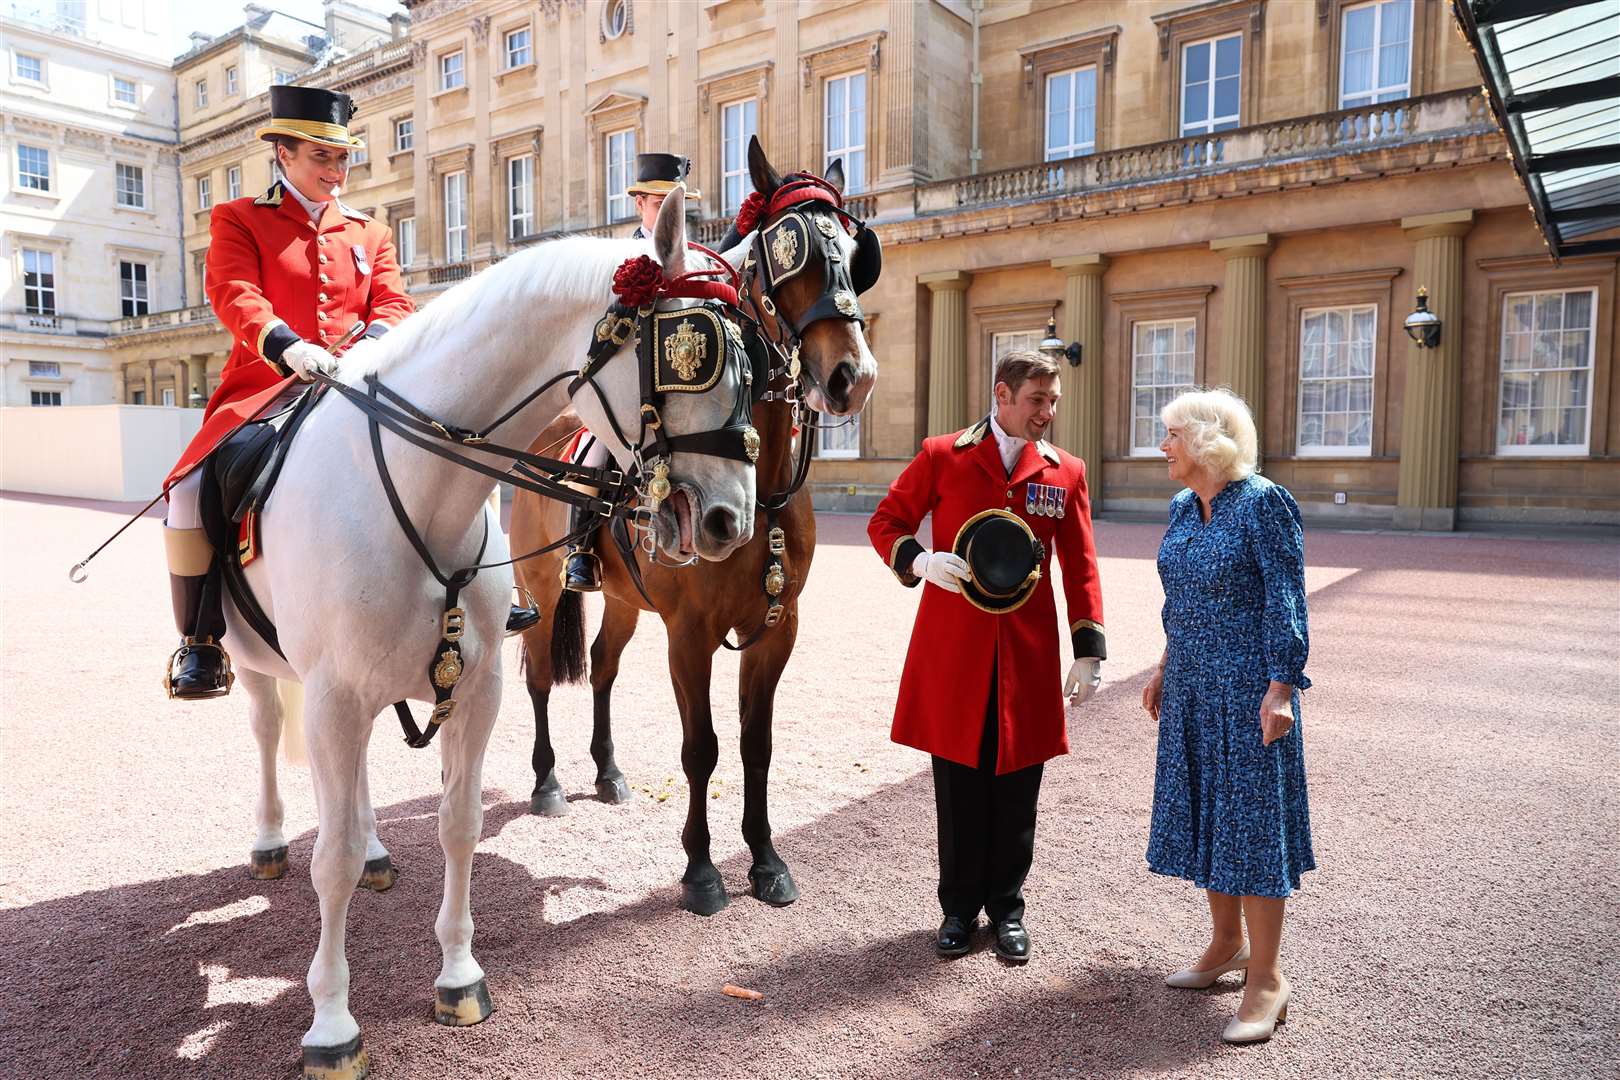 The Queen met and fed horses ahead of the reception (Geoff Pugh/Daily Telegraph/PA)